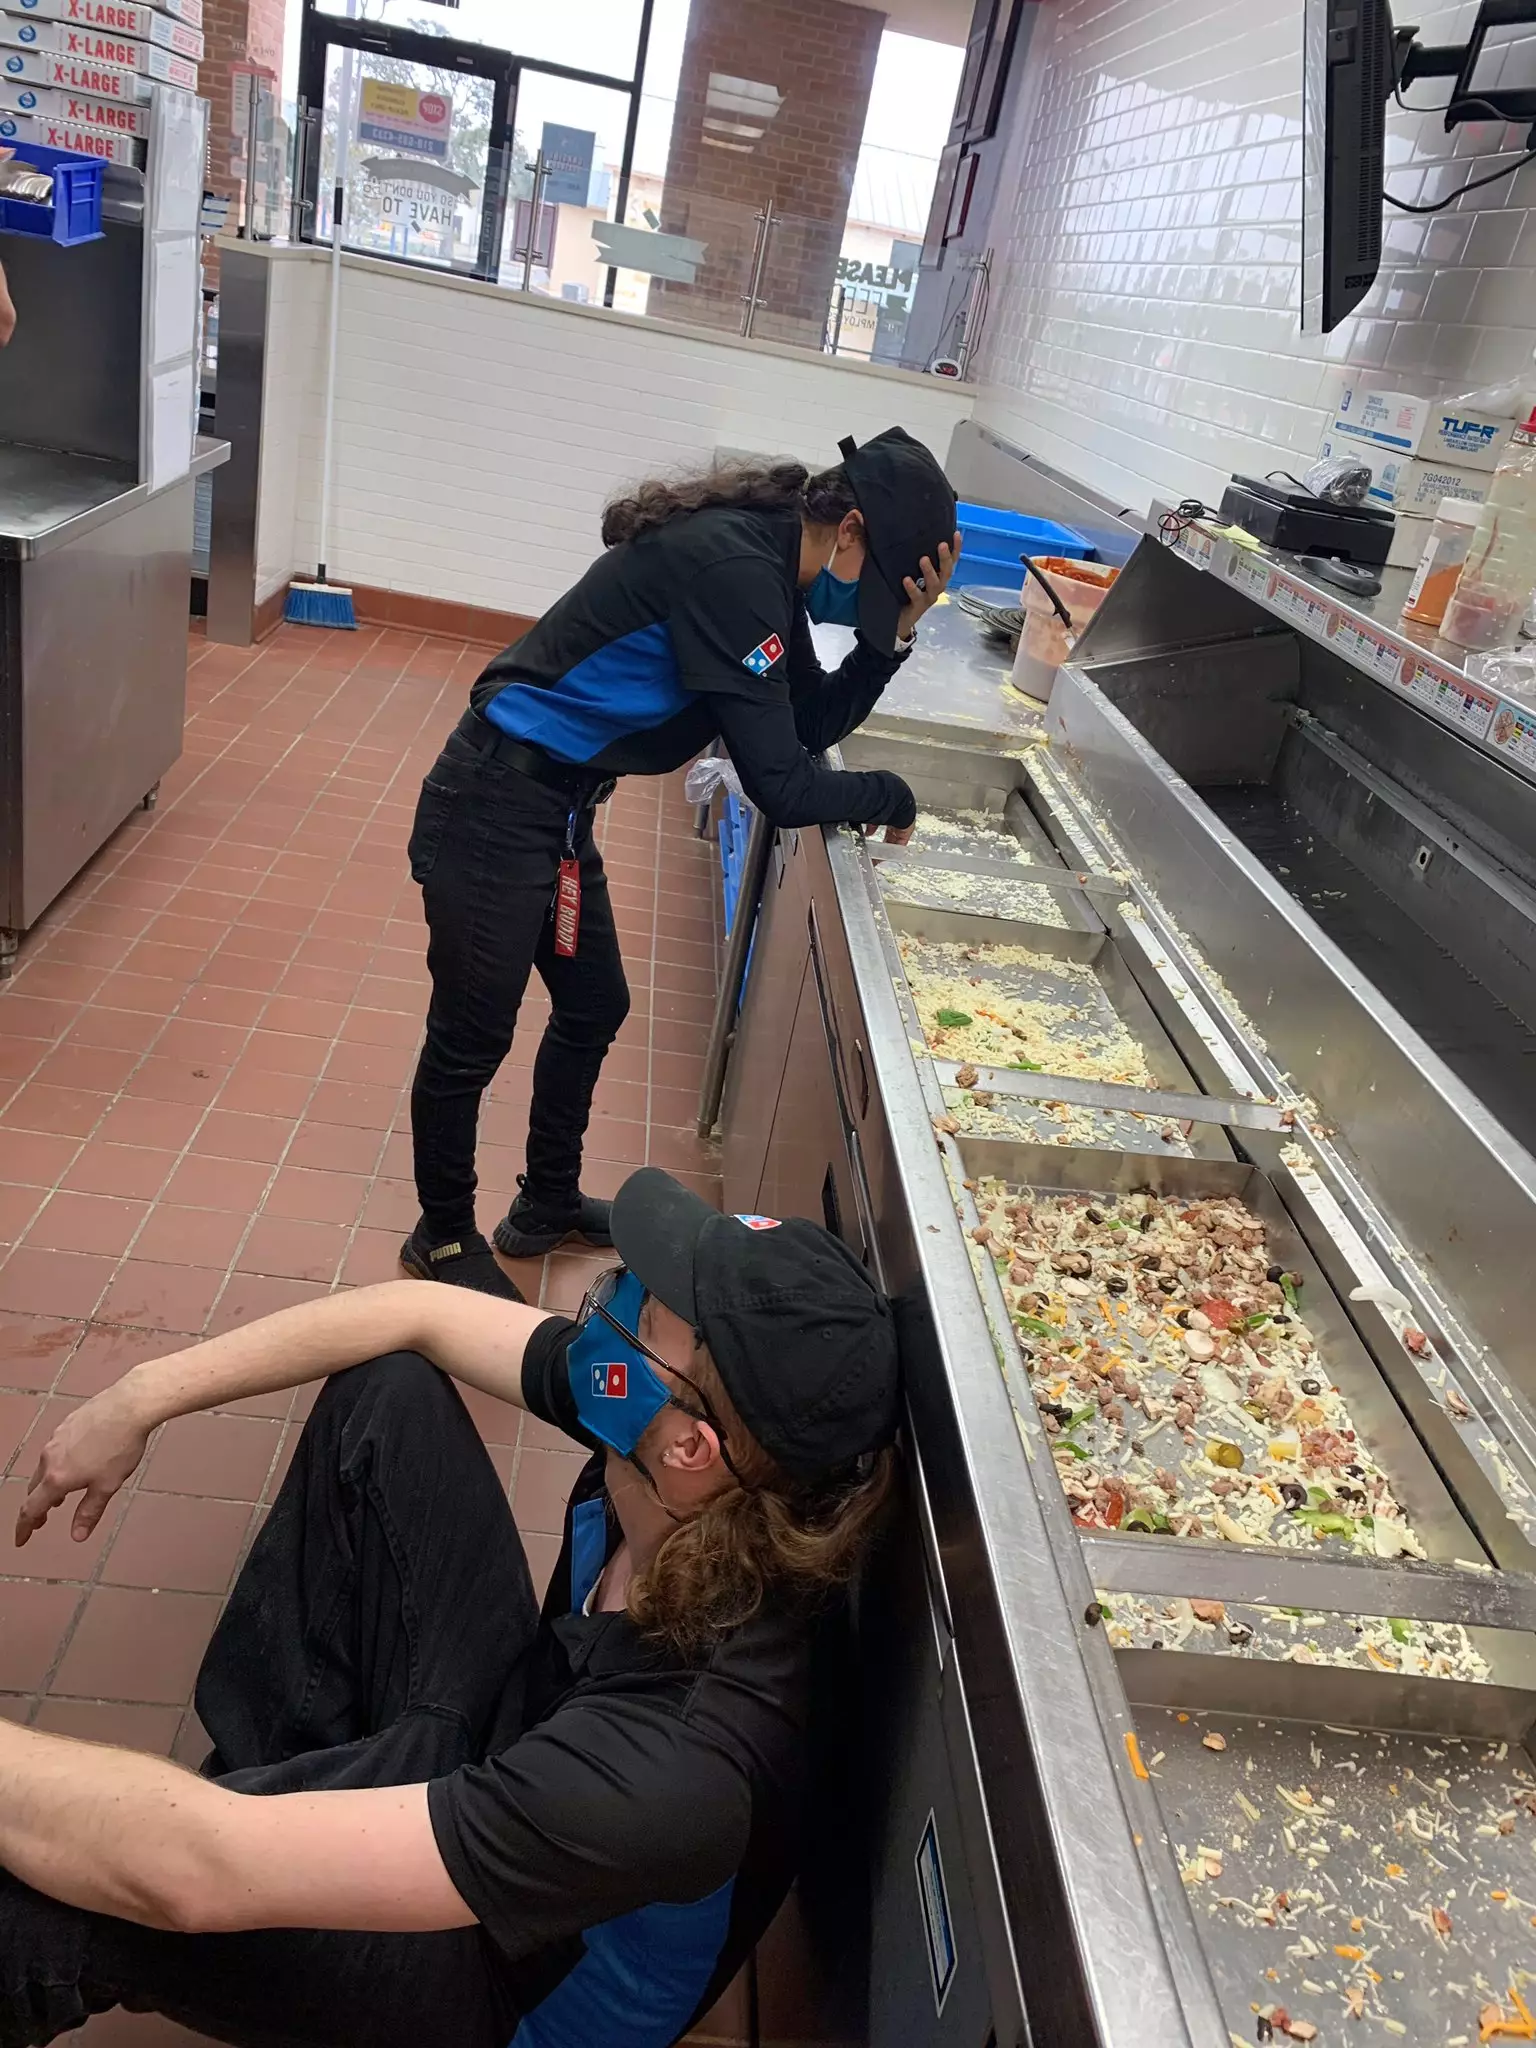 The Domino's workers were rushed off their feet.